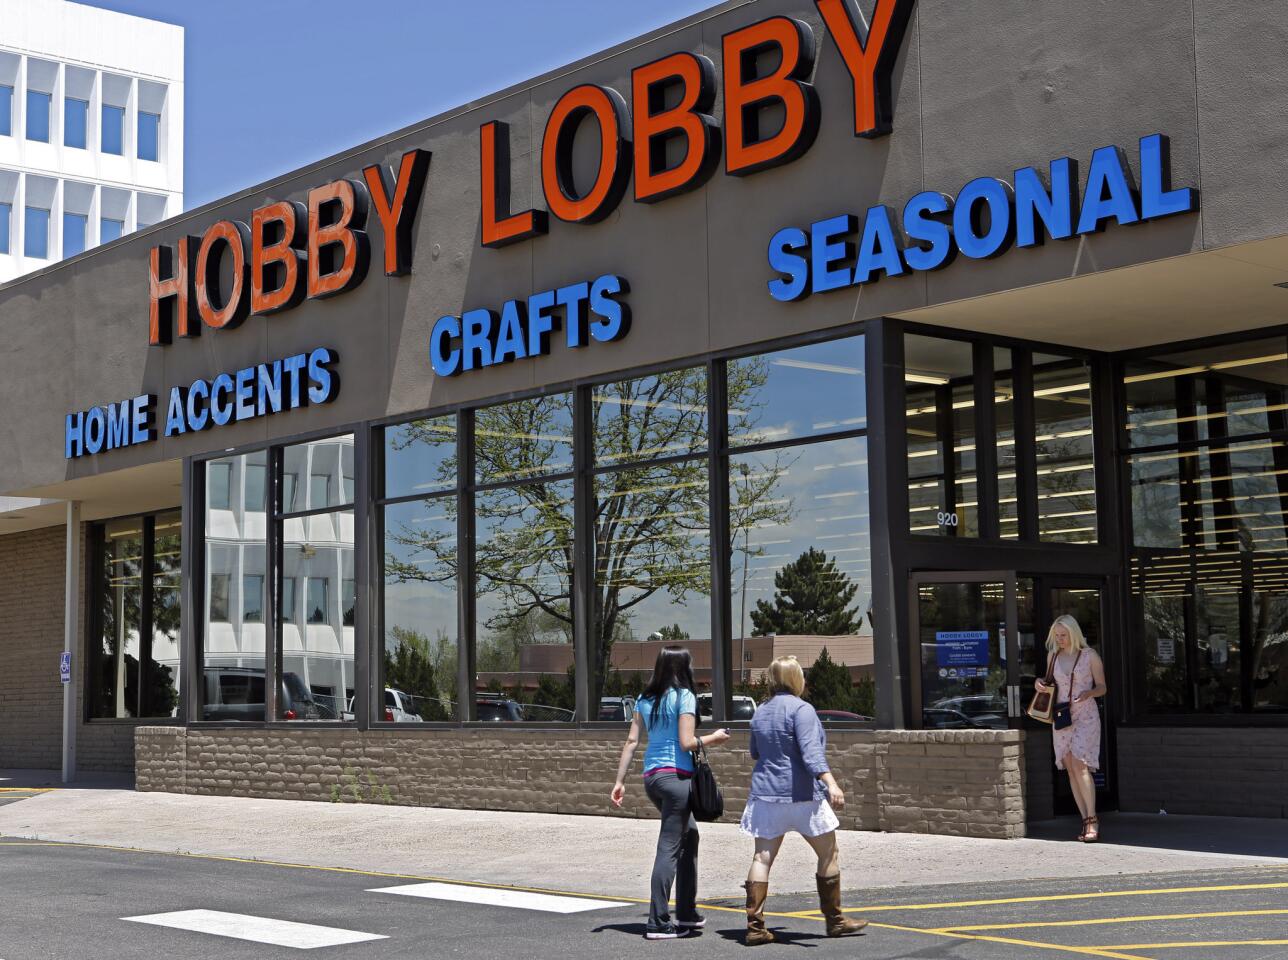 Hobby Lobby waged a fight against Obamacare's contraception mandate